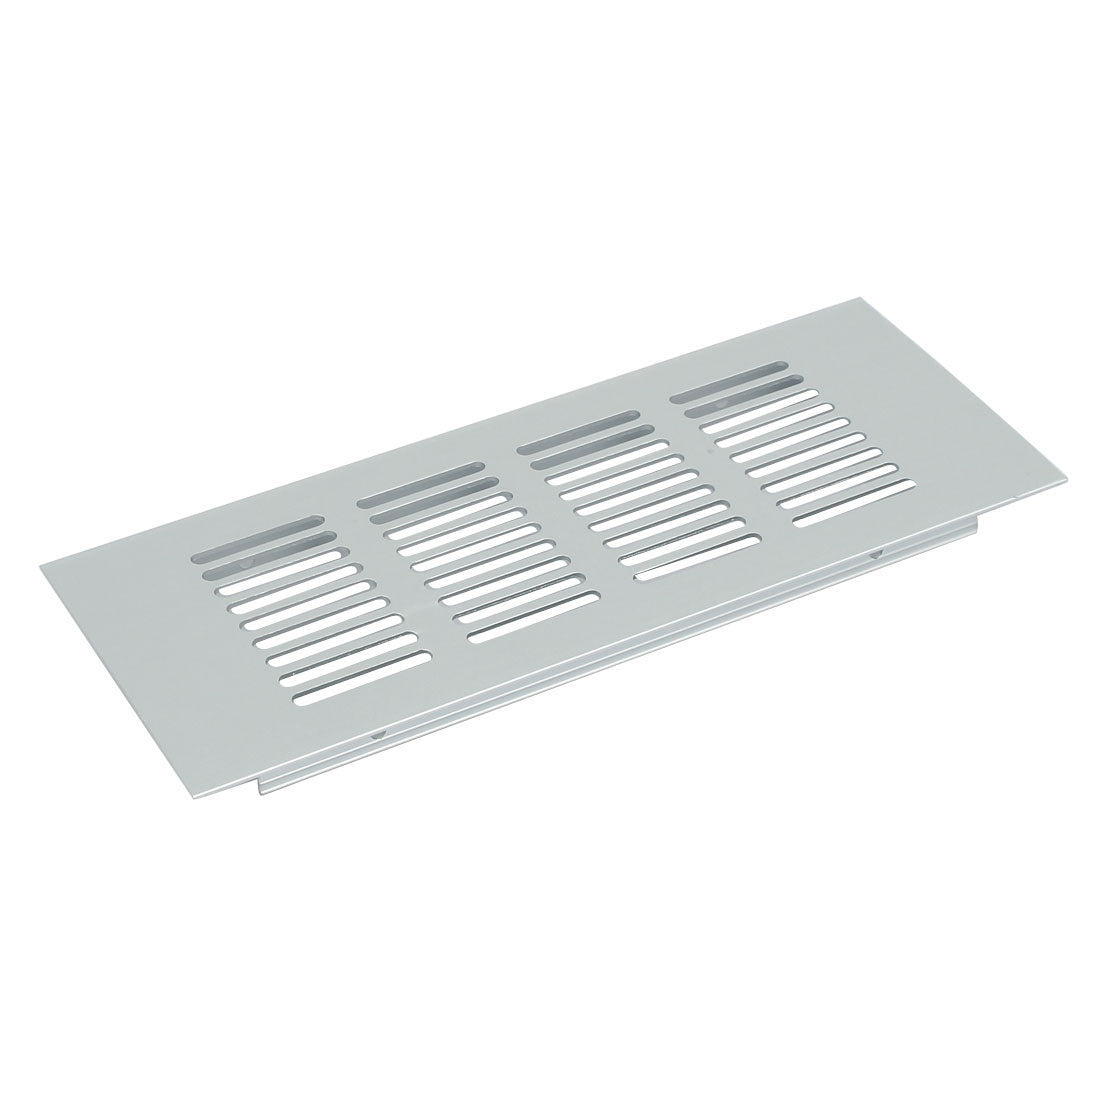 uxcell Uxcell Aluminum Alloy Air Vent Louvered Grill Cover Ventilation Grille 200mmx80mm